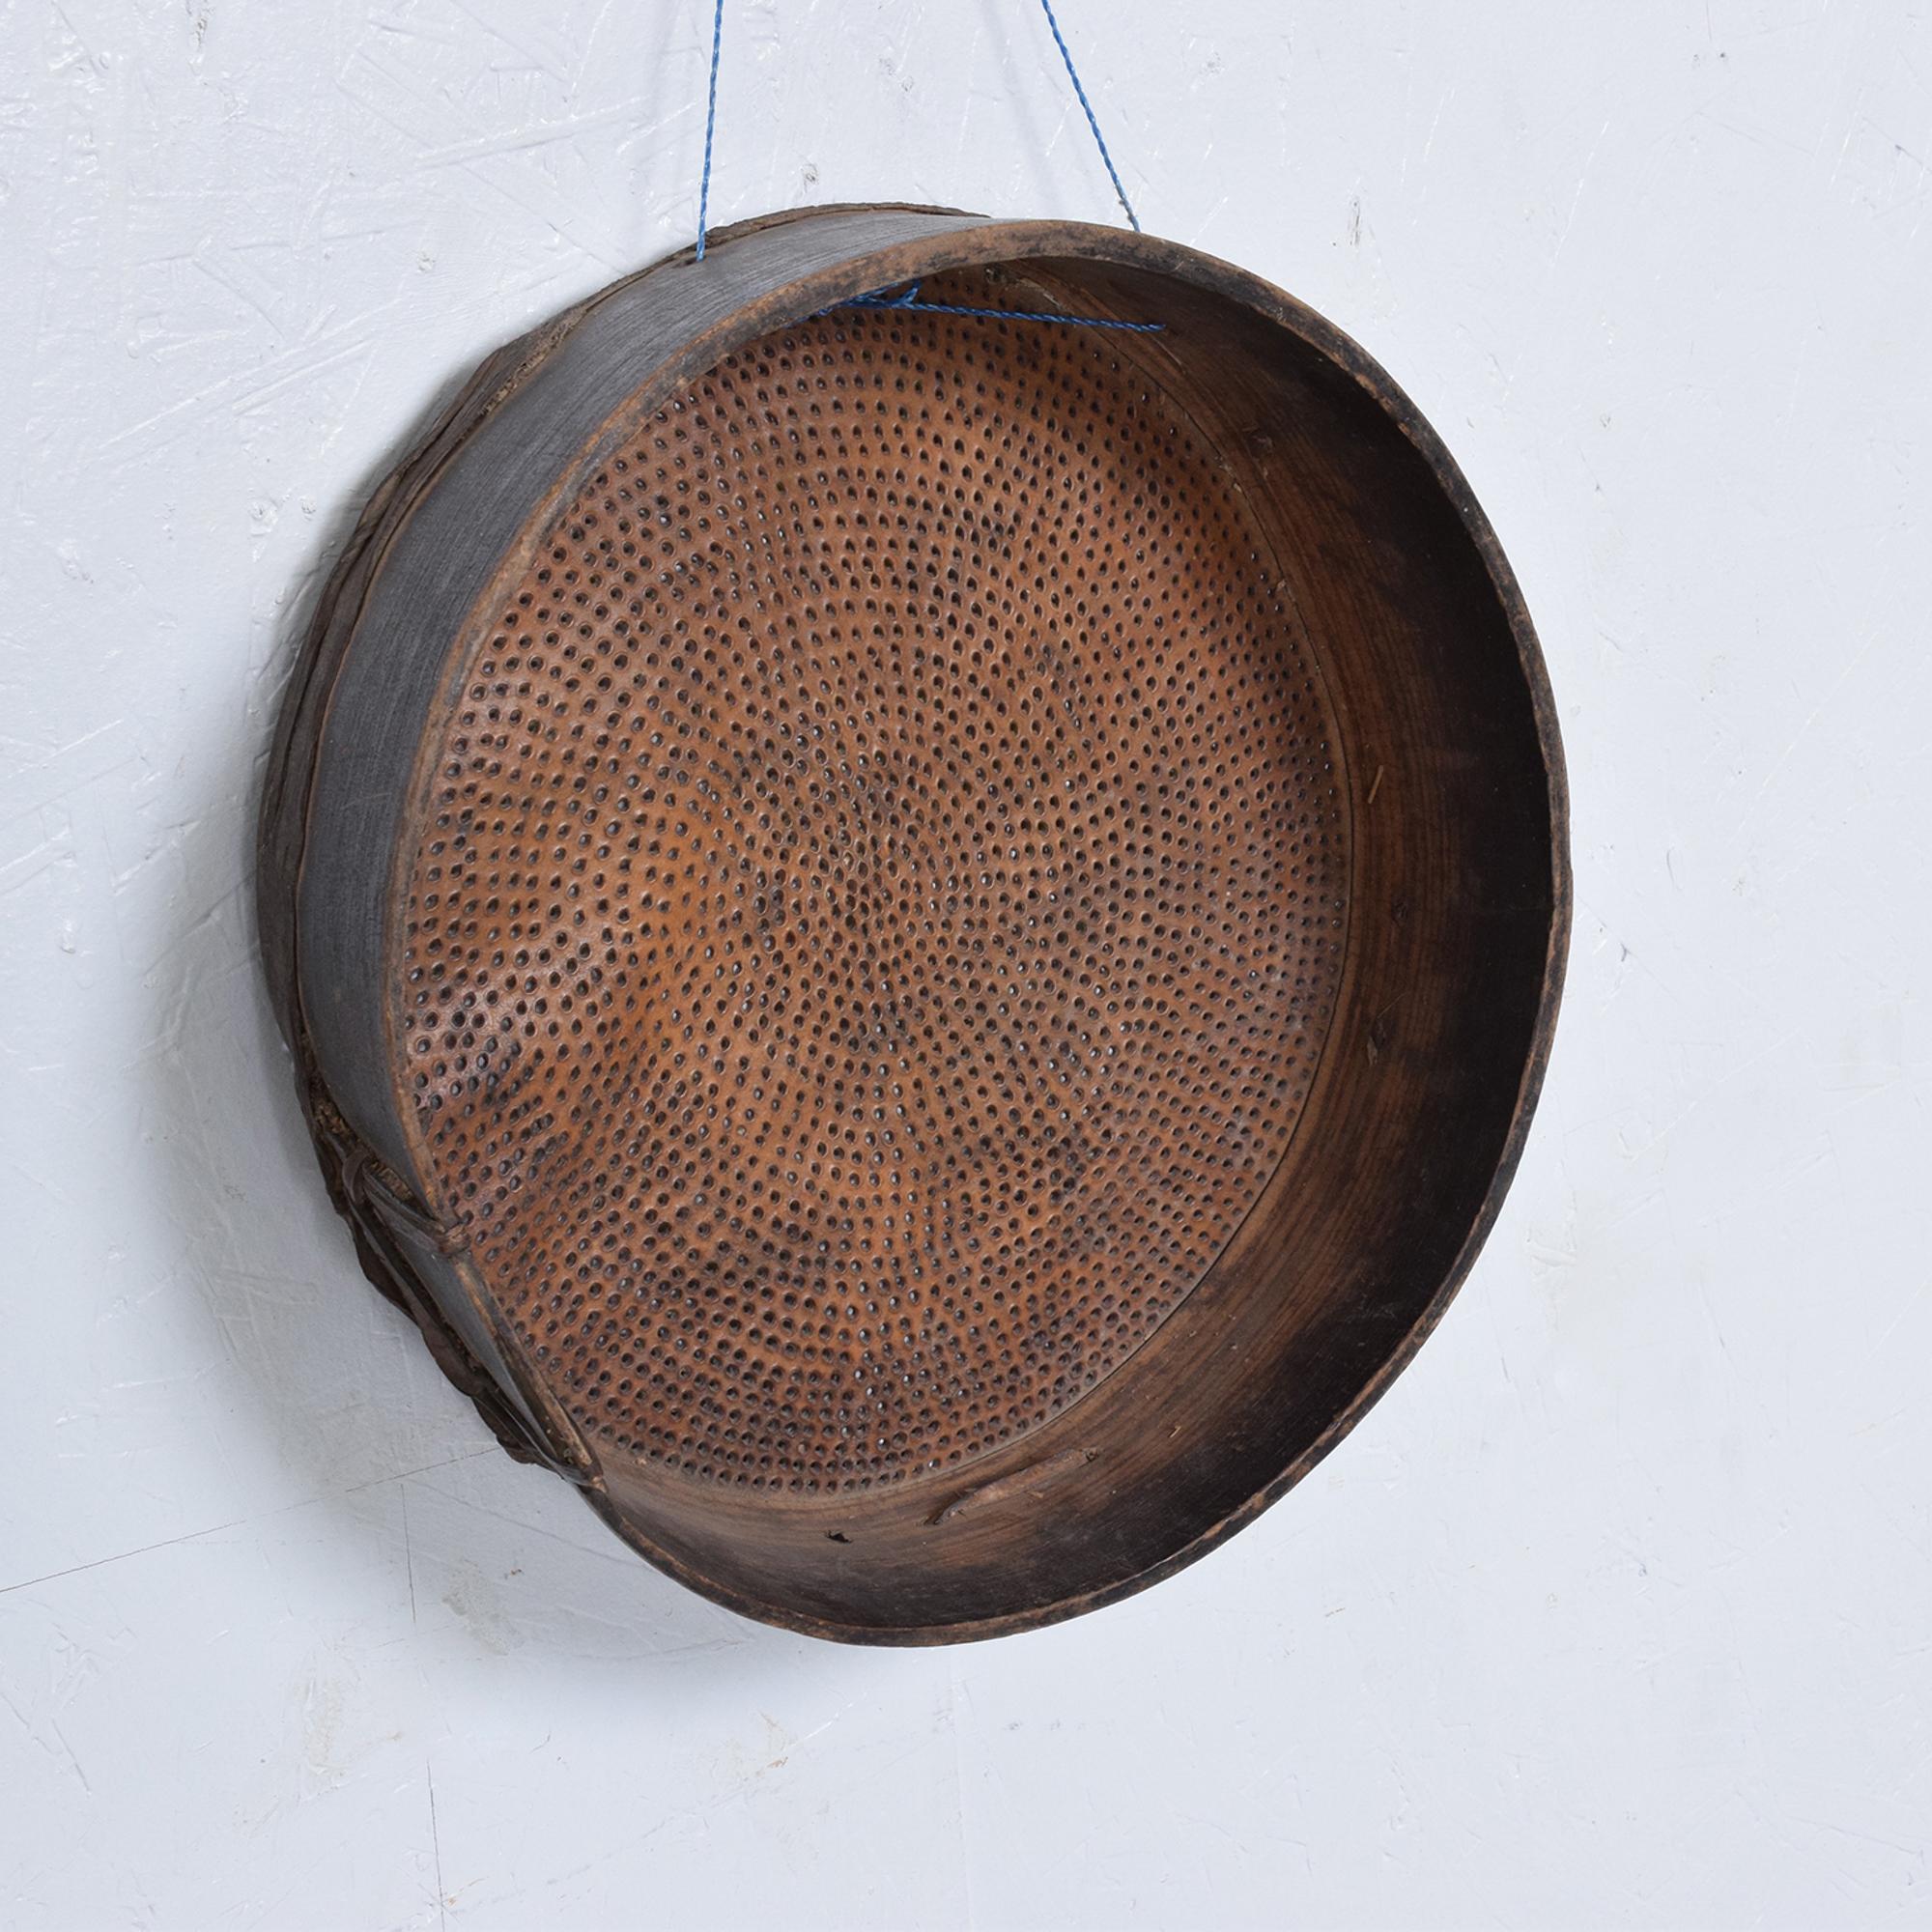 Farm Tool
Antique Goatskin Bentwood Flour Sieve Primitive Strainer Sifter Kitchen Ware Farm Tool from Guatemala,1800s.
Lovely decorative piece with tons of charm.
15 in diameter x 4 h inches
Wear consistent with age and use. Minor structural